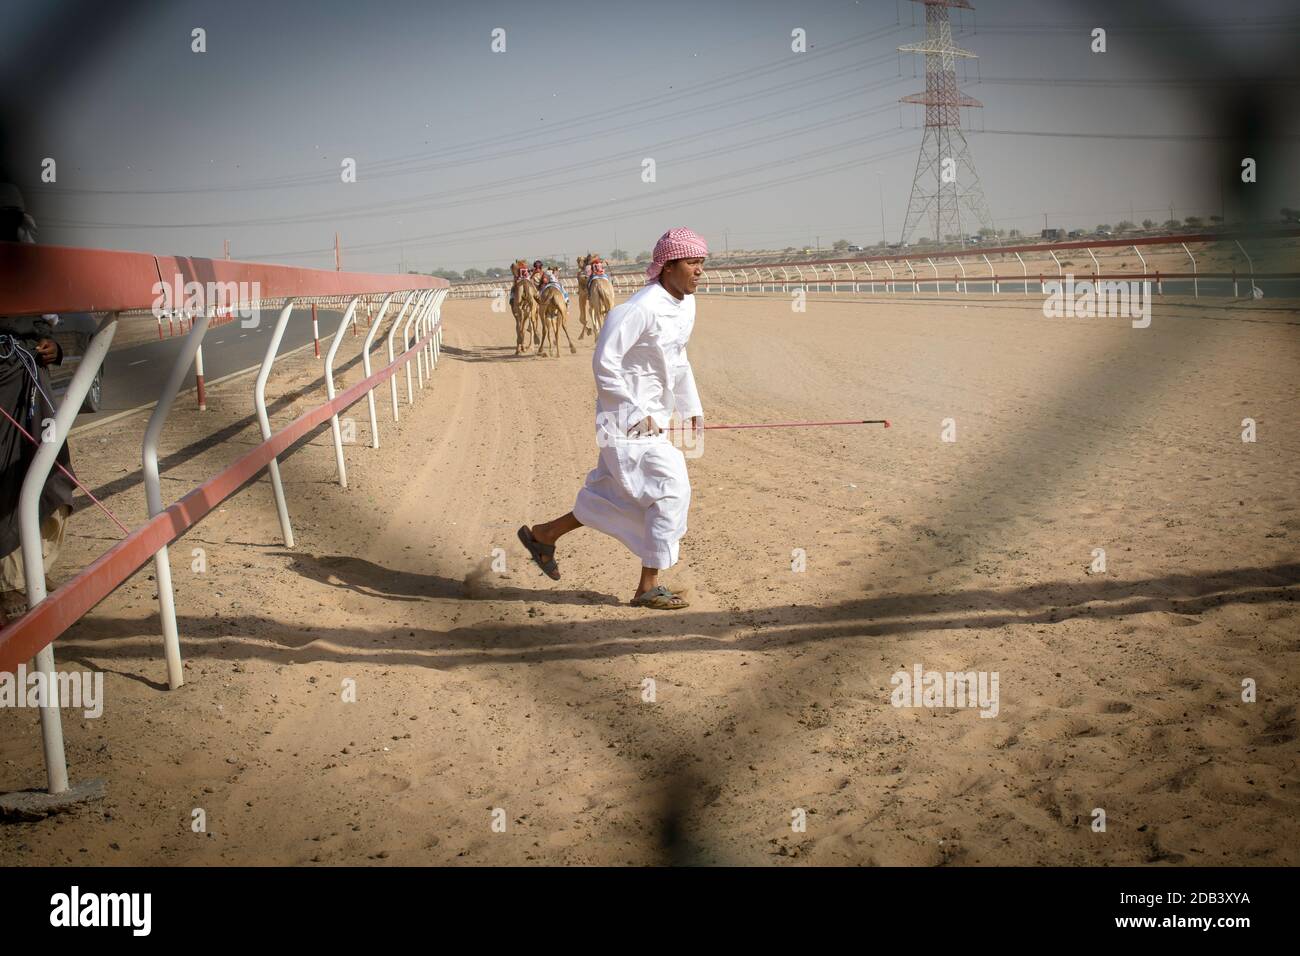 United Arab Emirates / Al Dhaid / Camel Race Track  in Central Region of the Emirate of Sharjah in the United Arab Emirates As the races get underway, Stock Photo